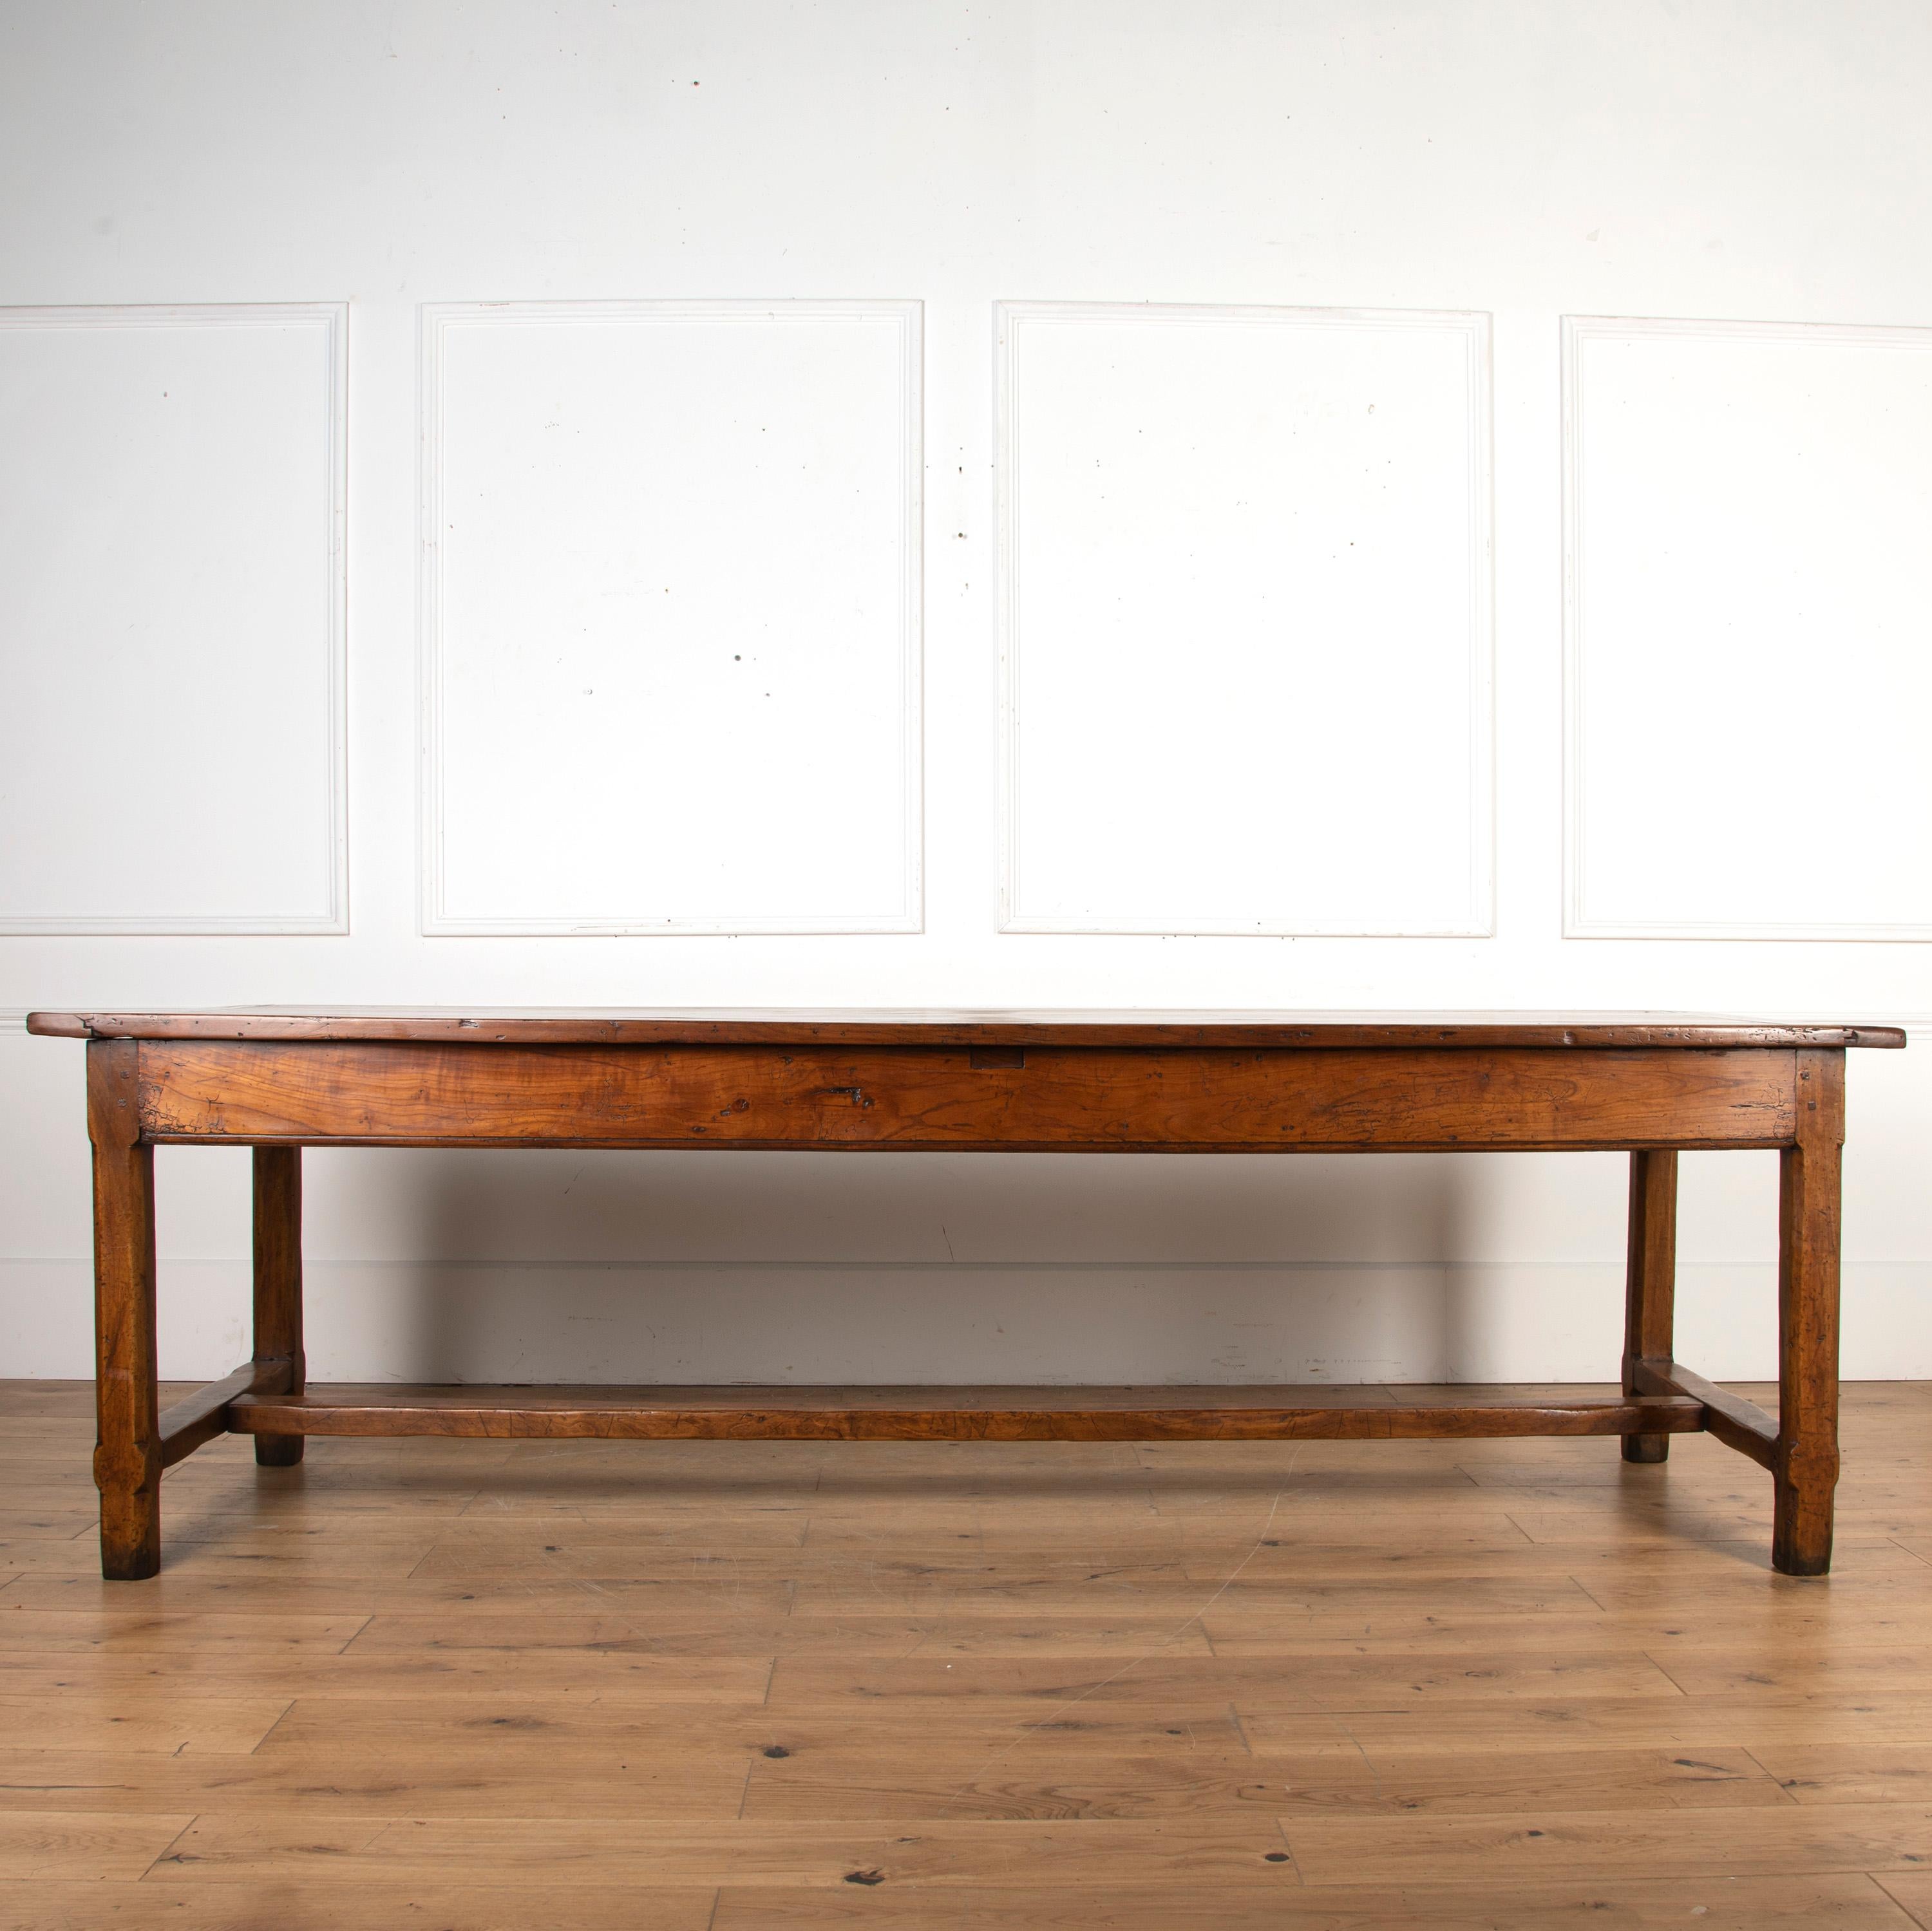 Fantastic mid 19th century solid cherrywood farmhouse table.

This fabulous table dates to the mid 19th Century and will seat 8-10 people. This table would also be suitable for being used as a wonderful desk, library, or dining table. 

It has a